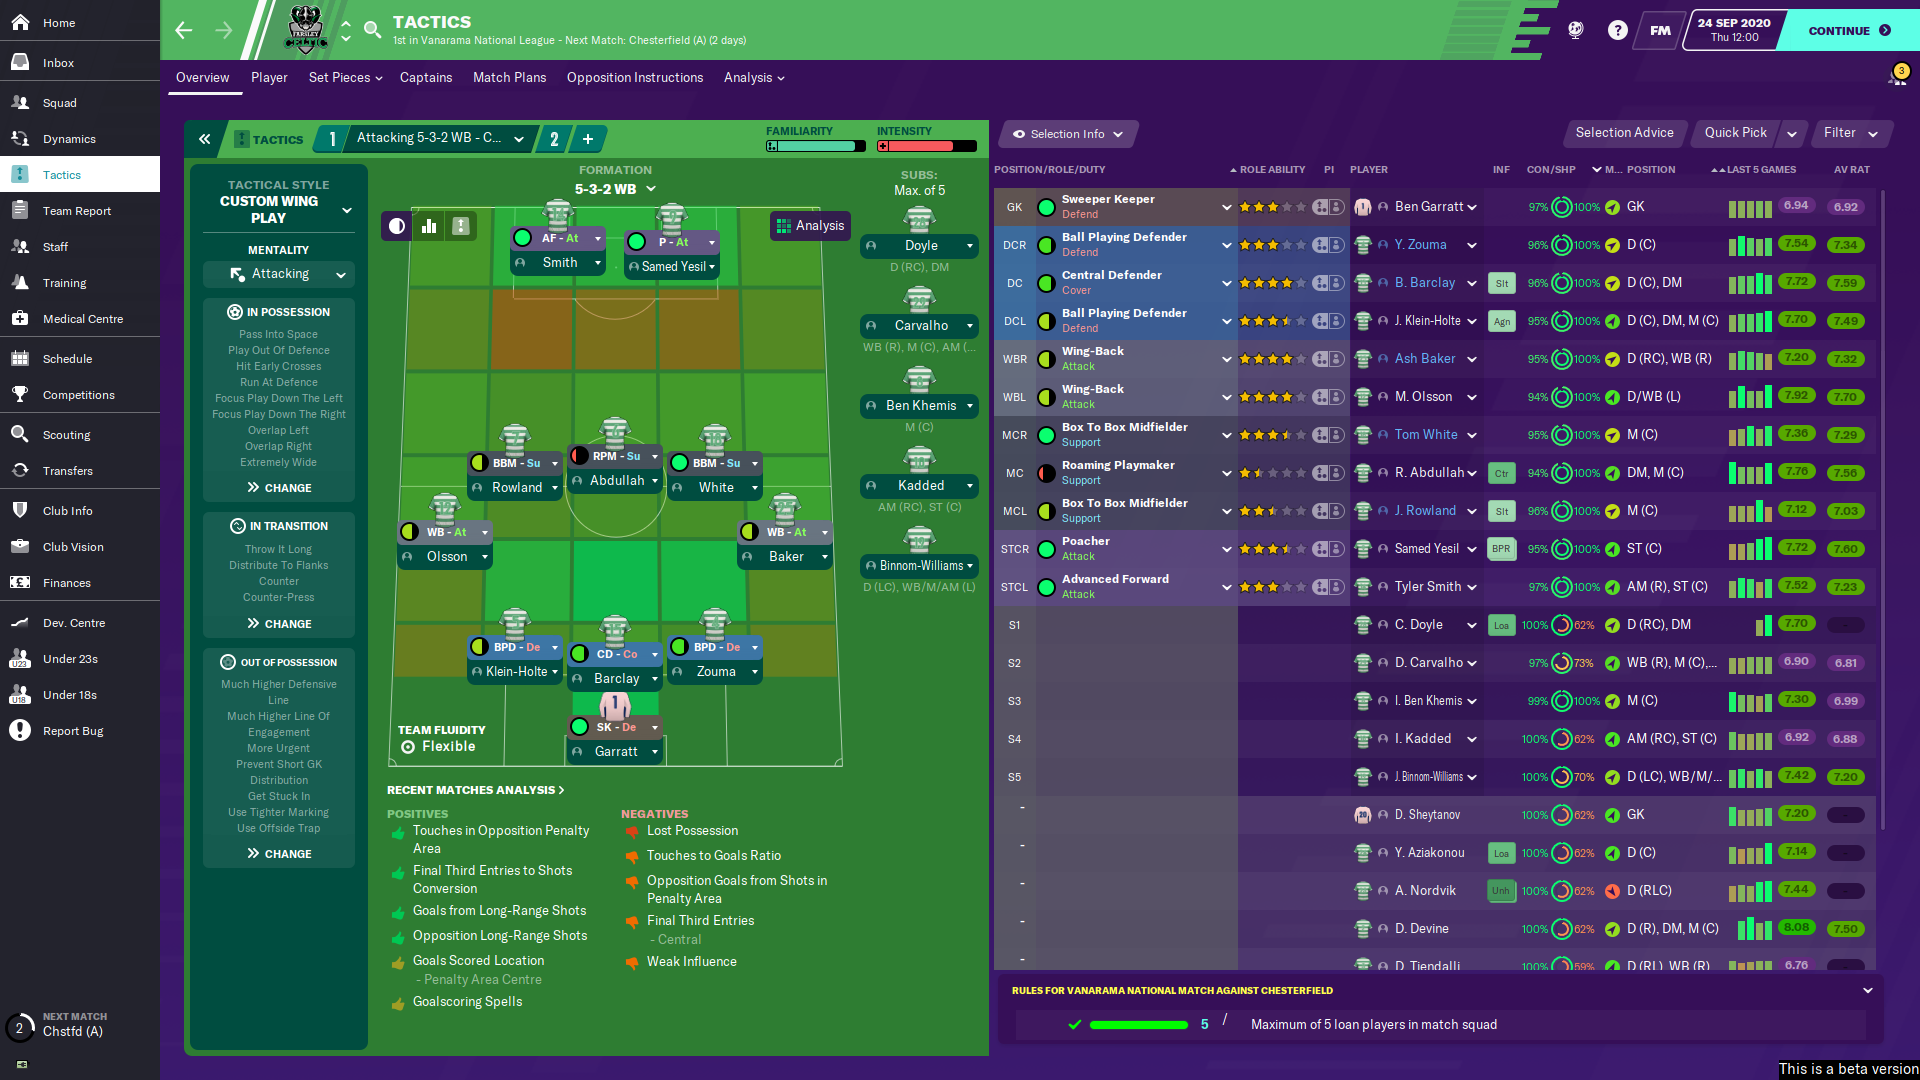 football manager 2019 best teams to manage